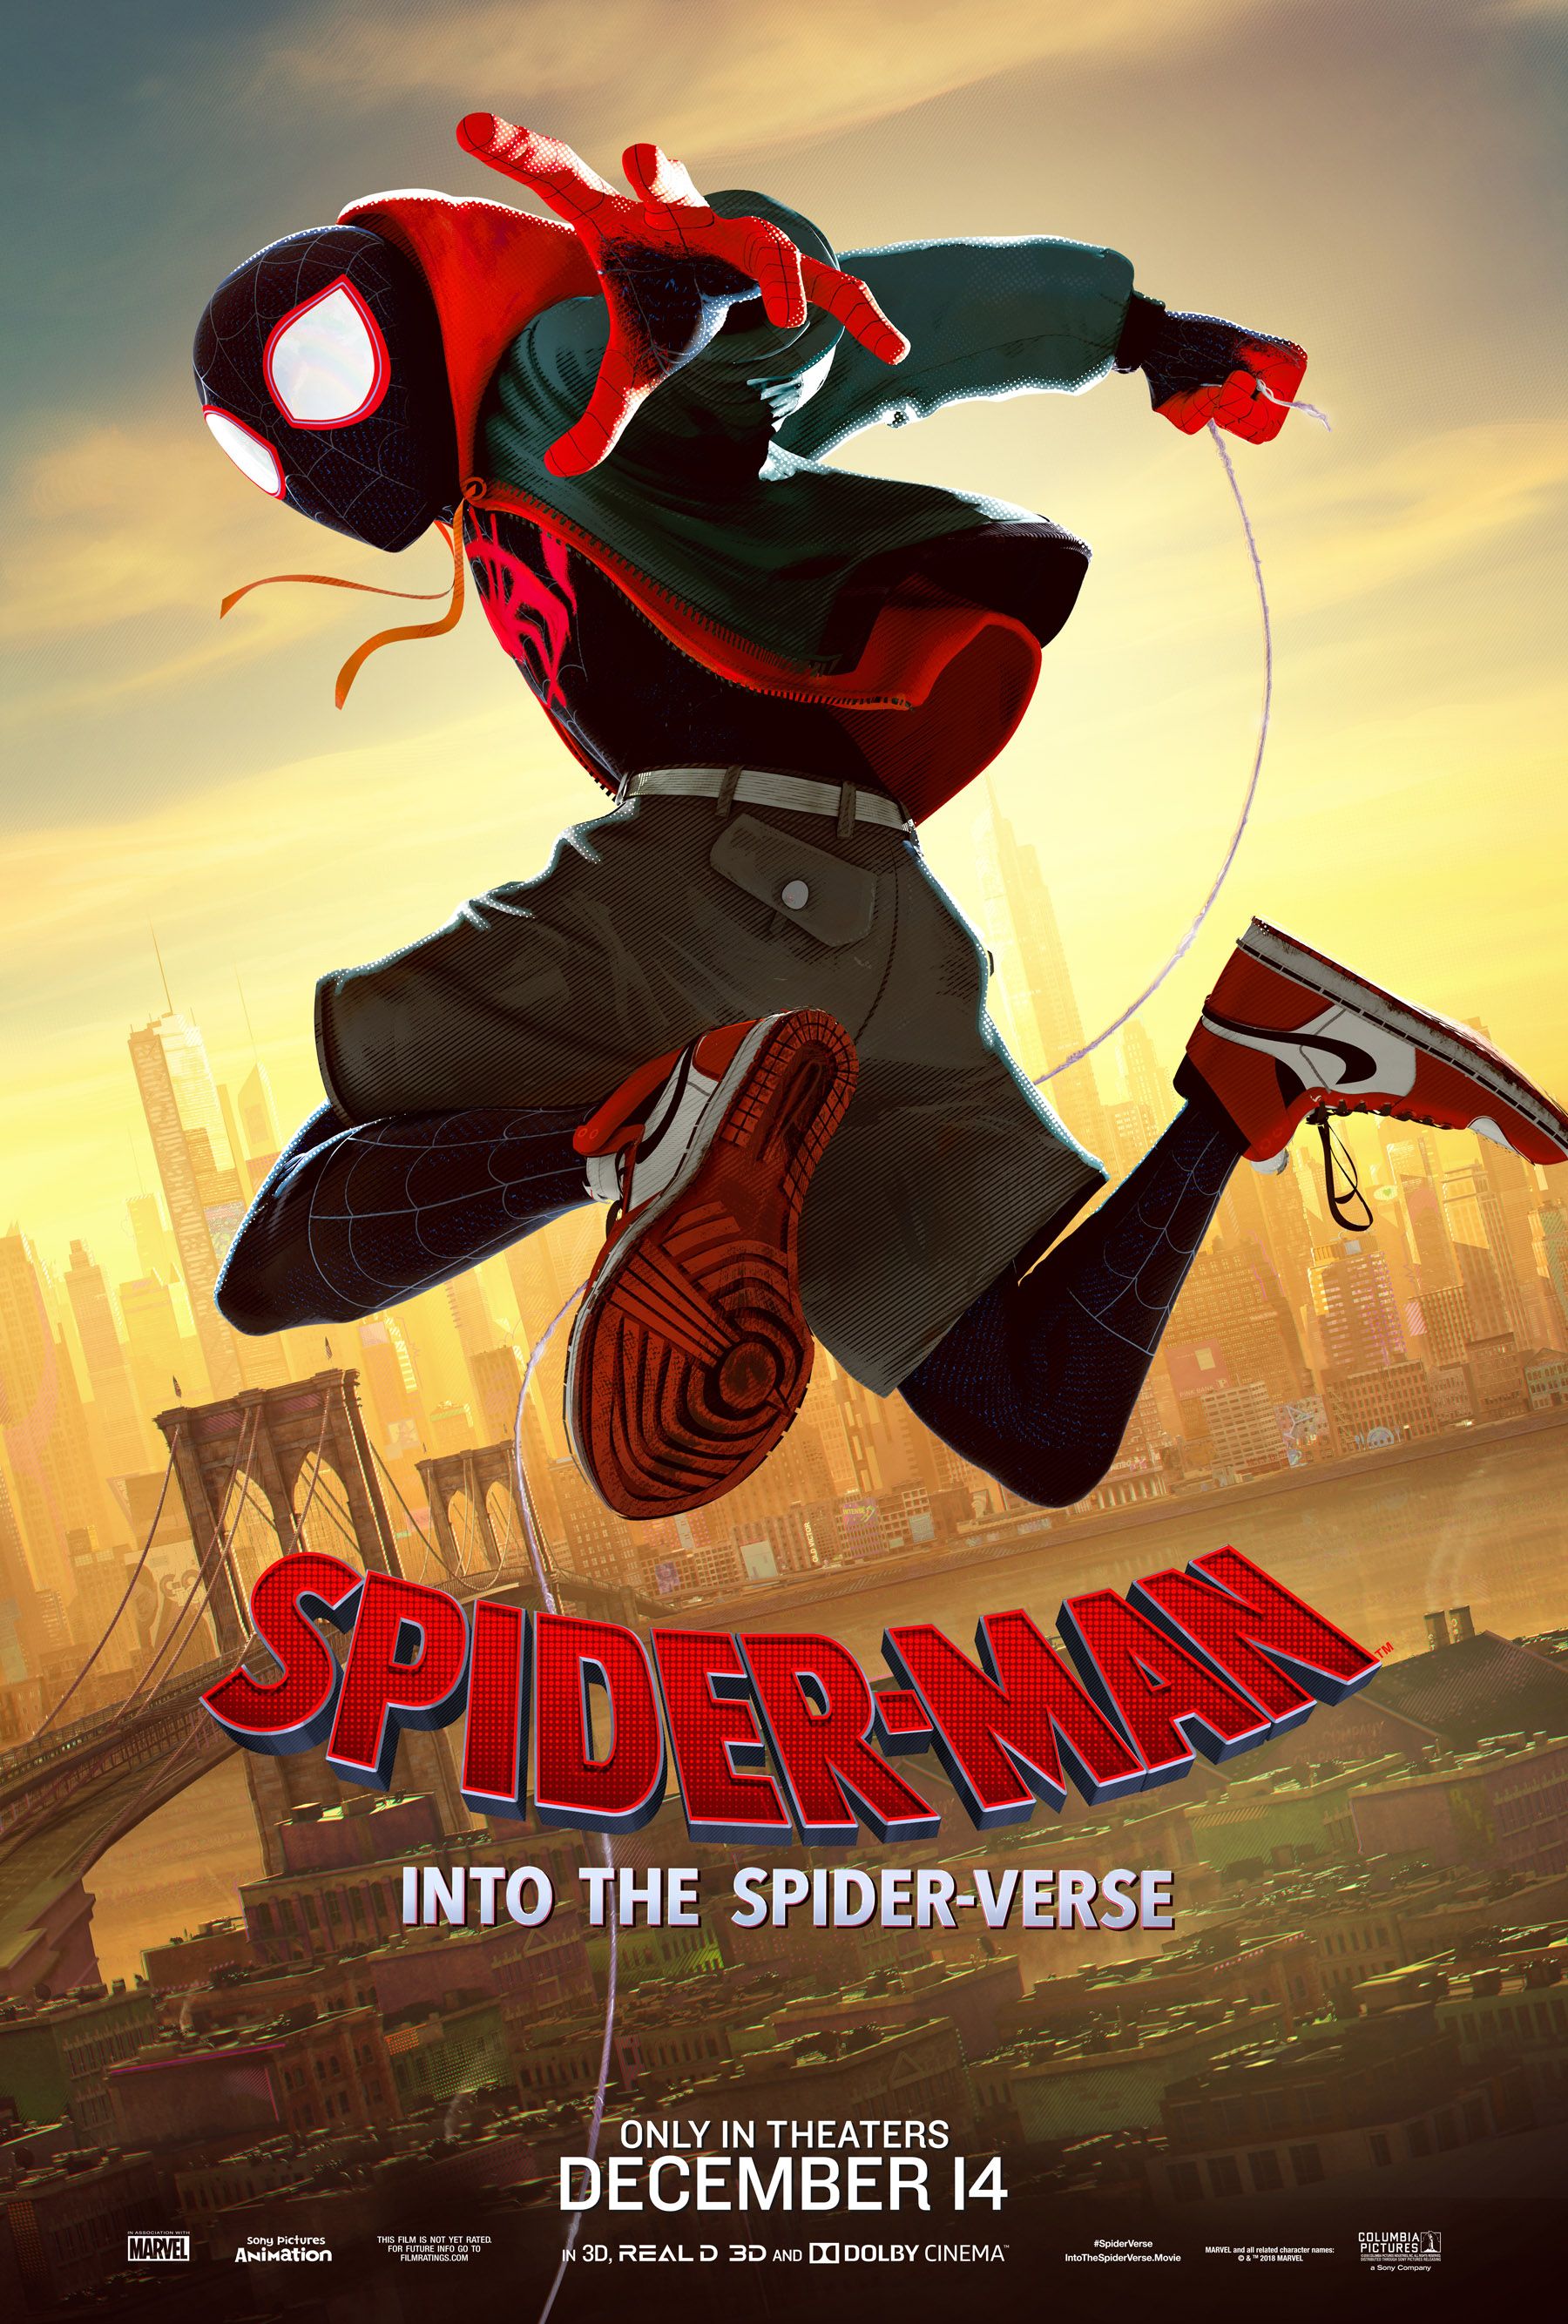 SPIDER-MAN Into The Spider-Verse Character Poster - Miles Morales